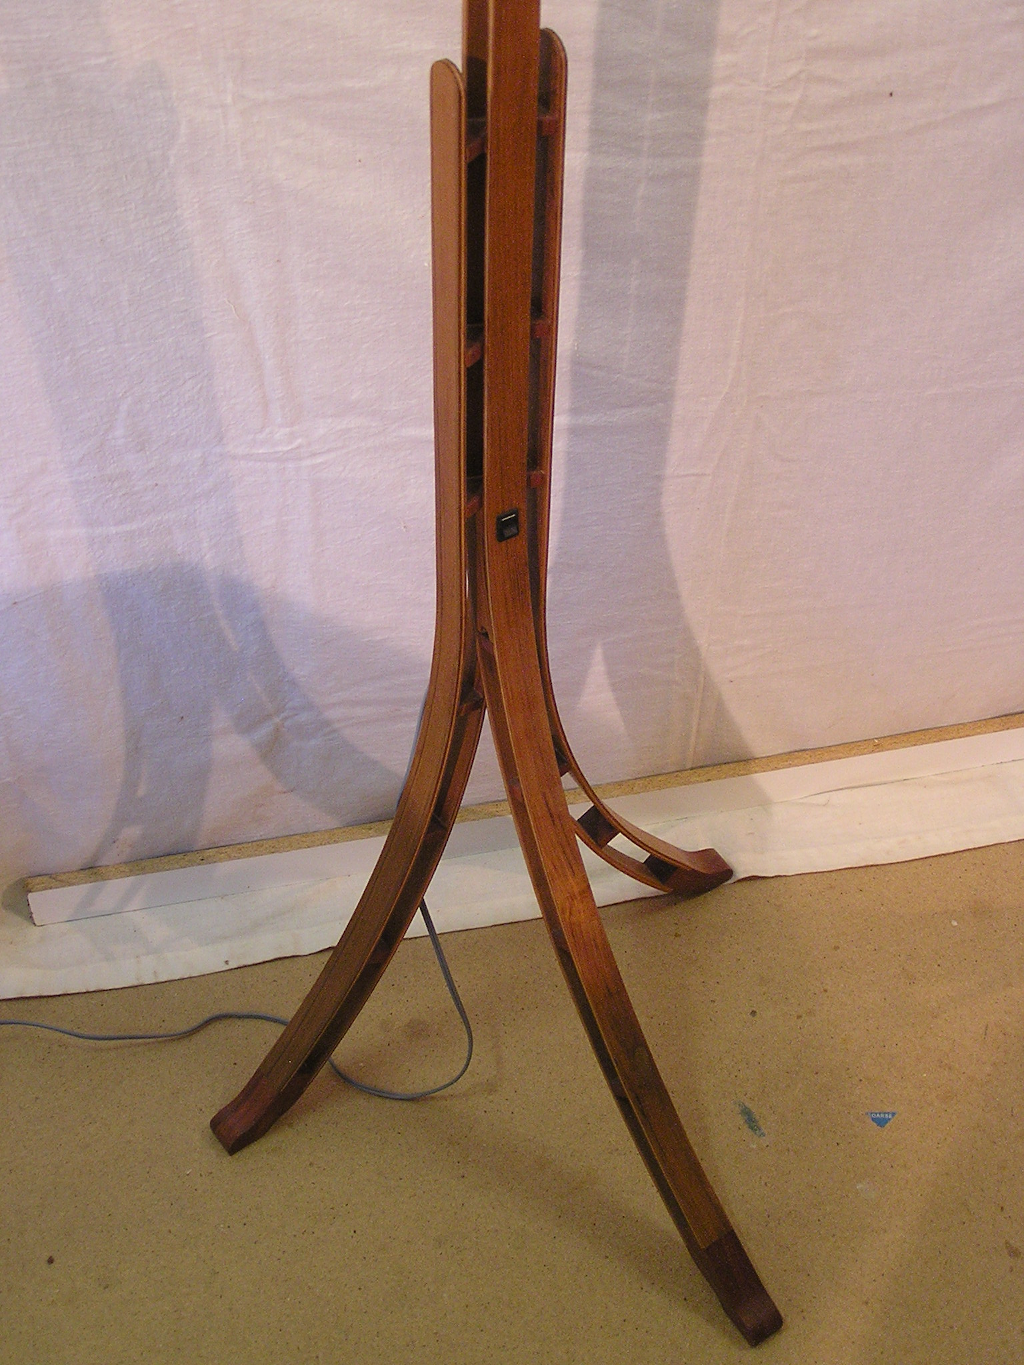 Closeup of the laminated legs from the front